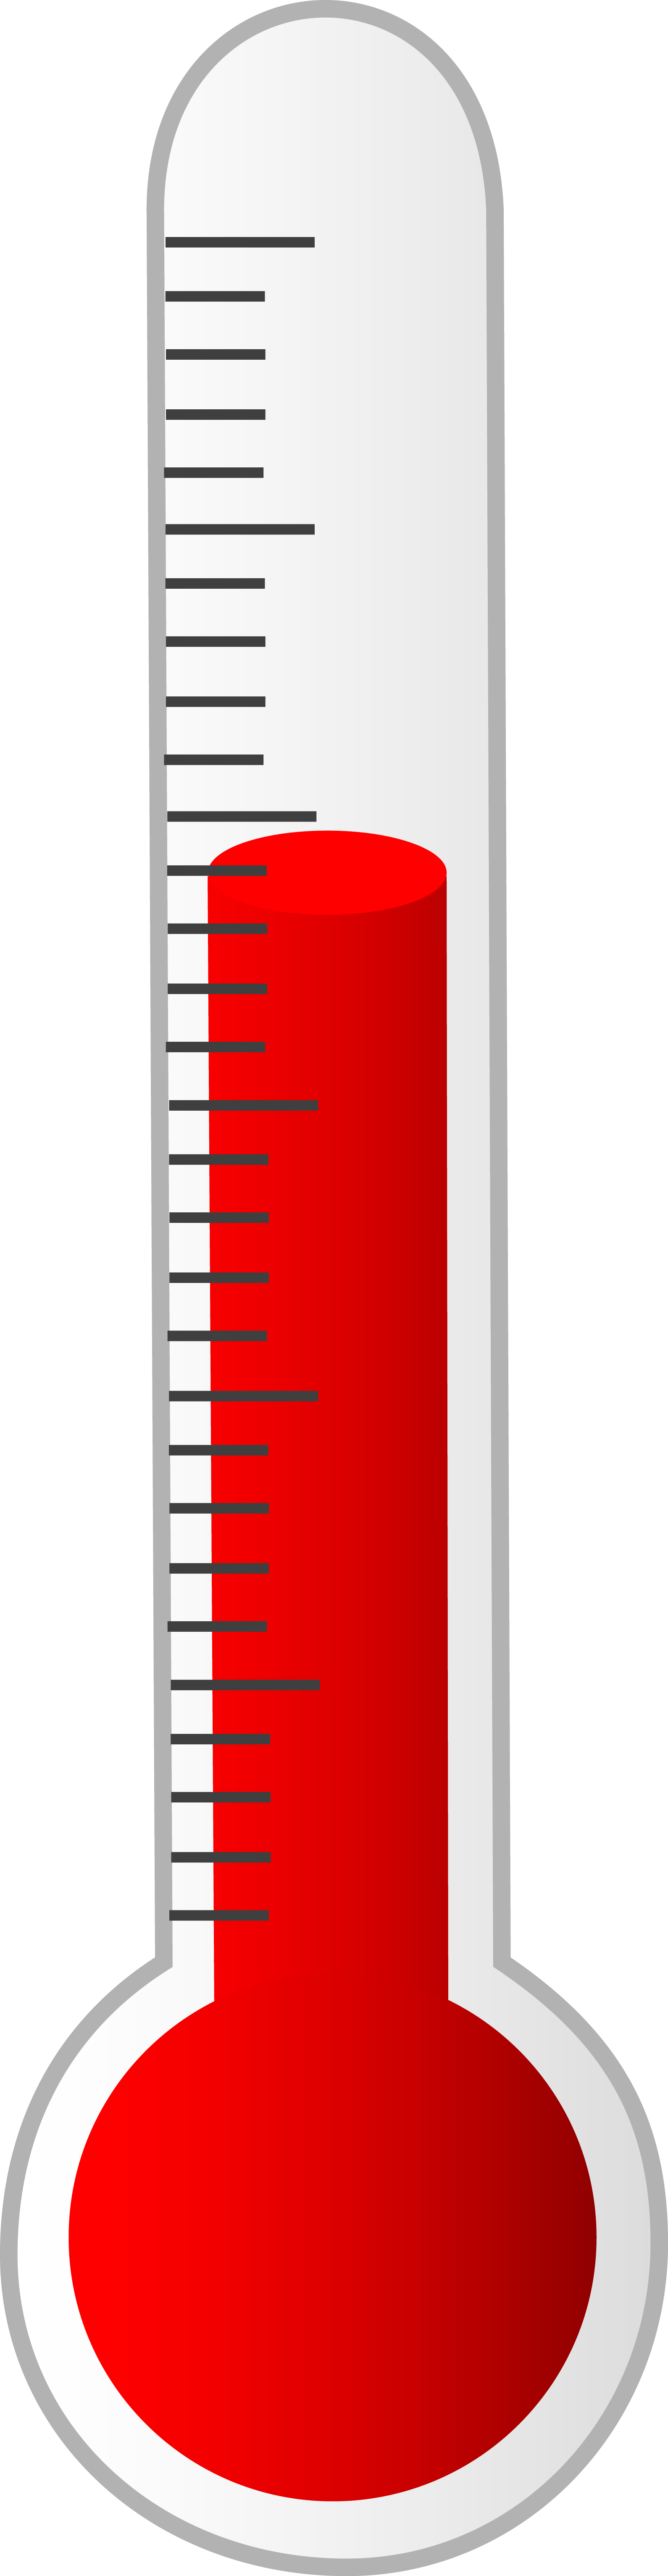 Fundraising clipart scale. Blank thermometer clip art